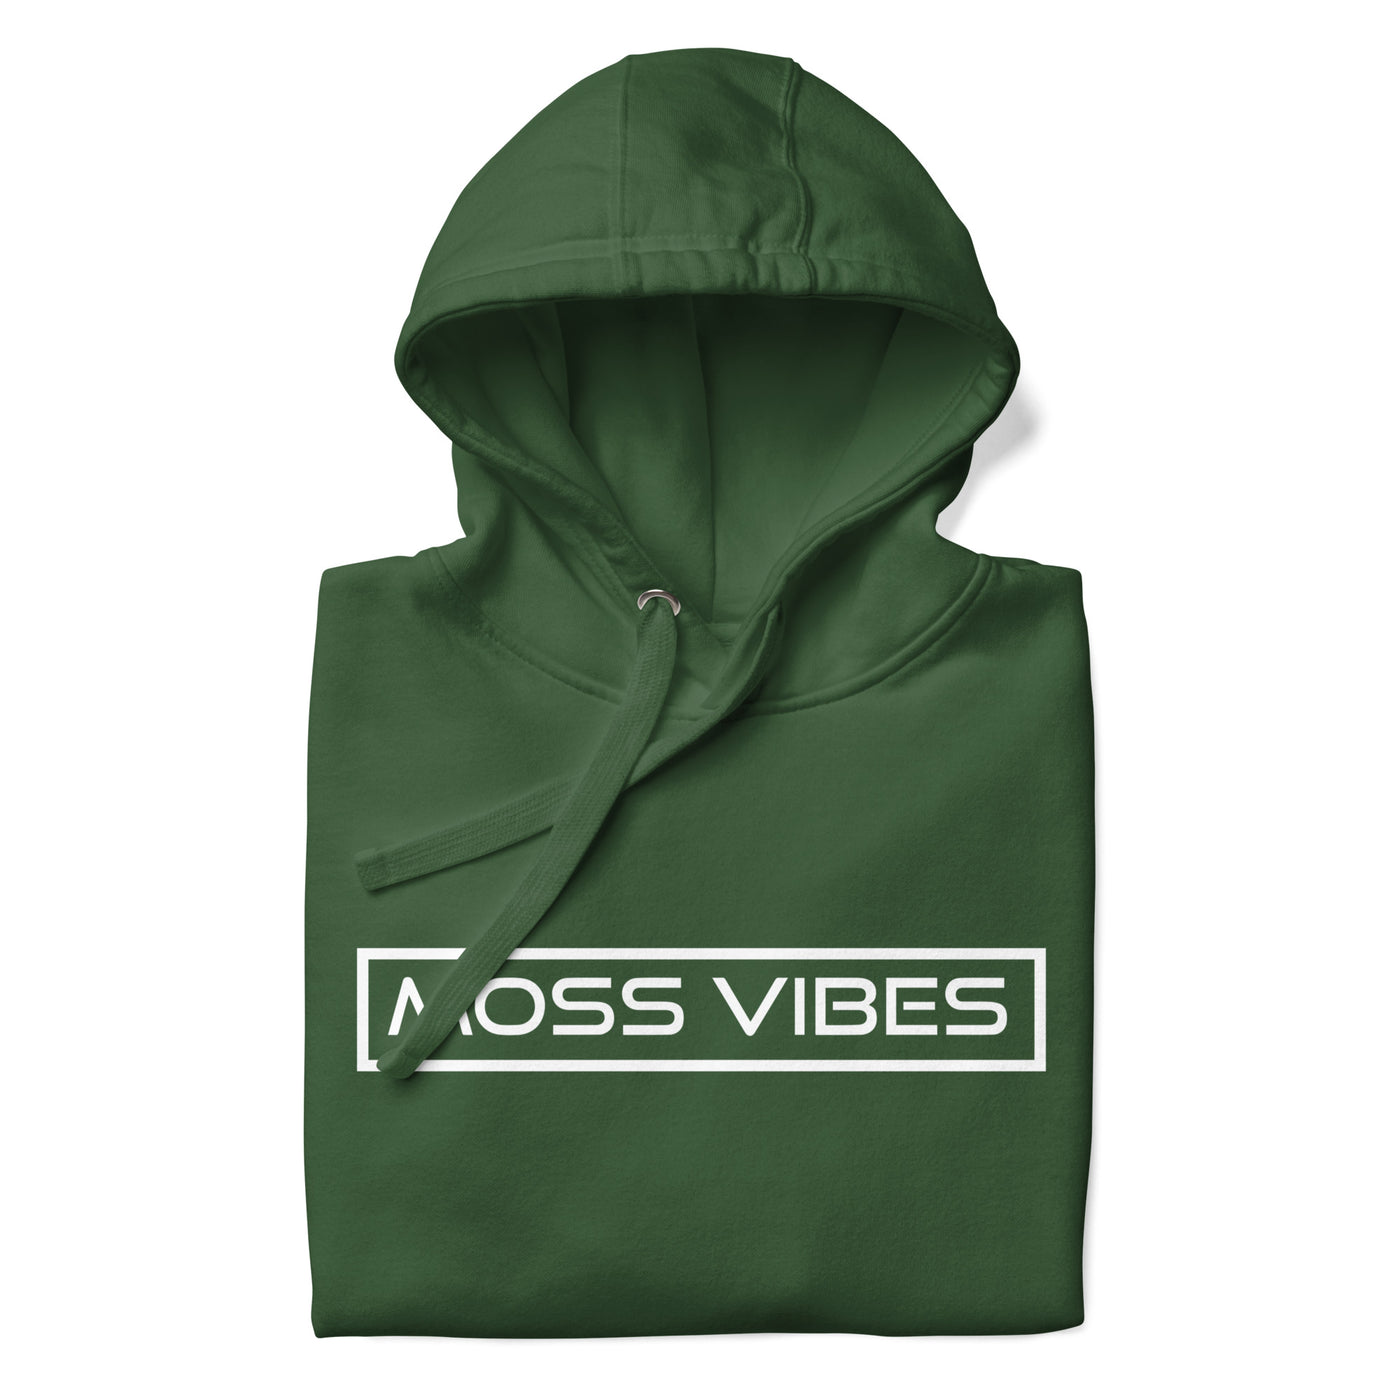 Moss Vibes White Logo Hoodie Forest